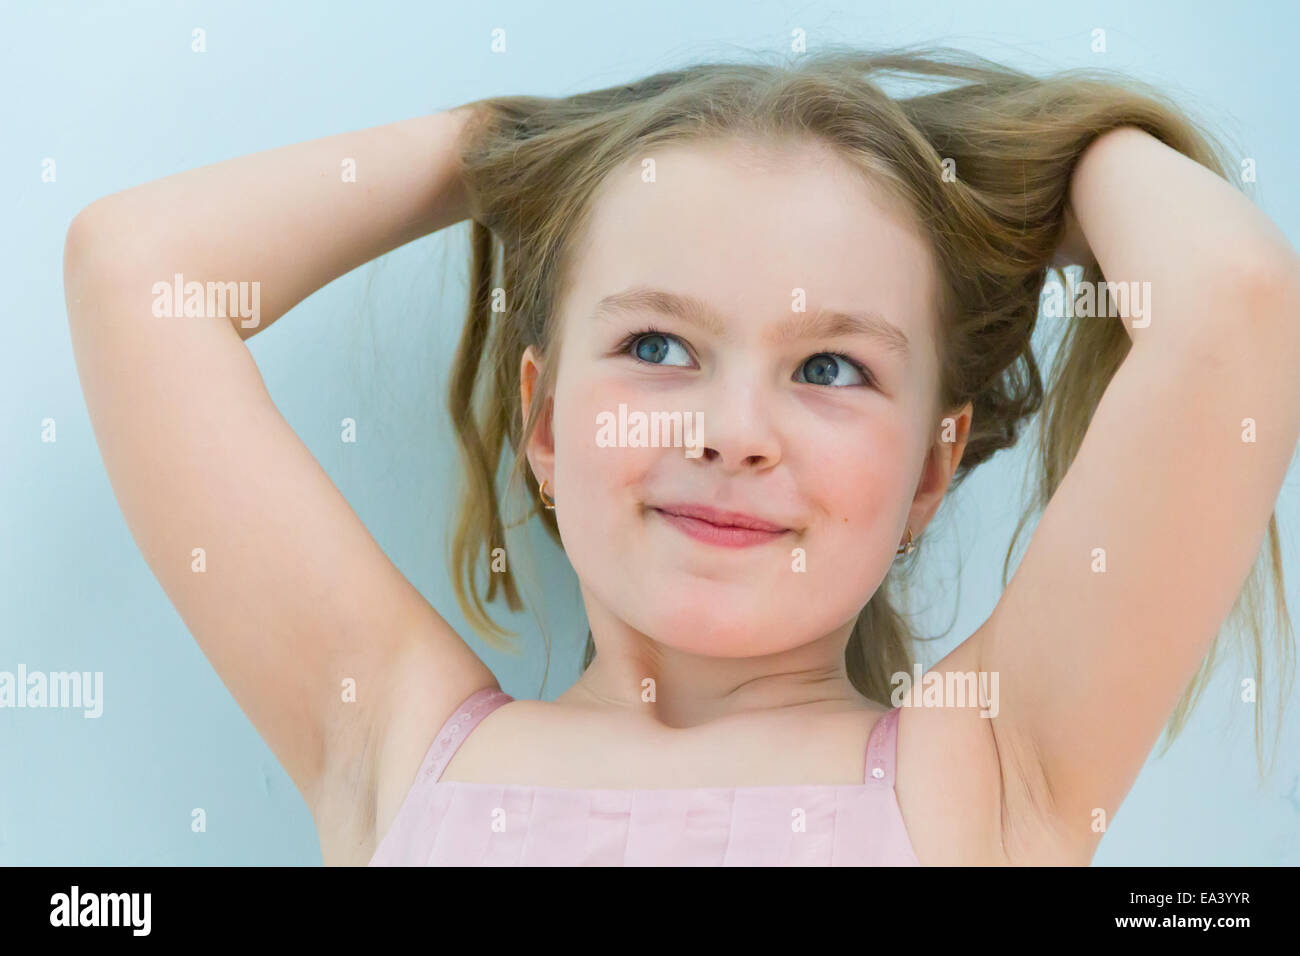 Cute girl seven years old Stock Photo